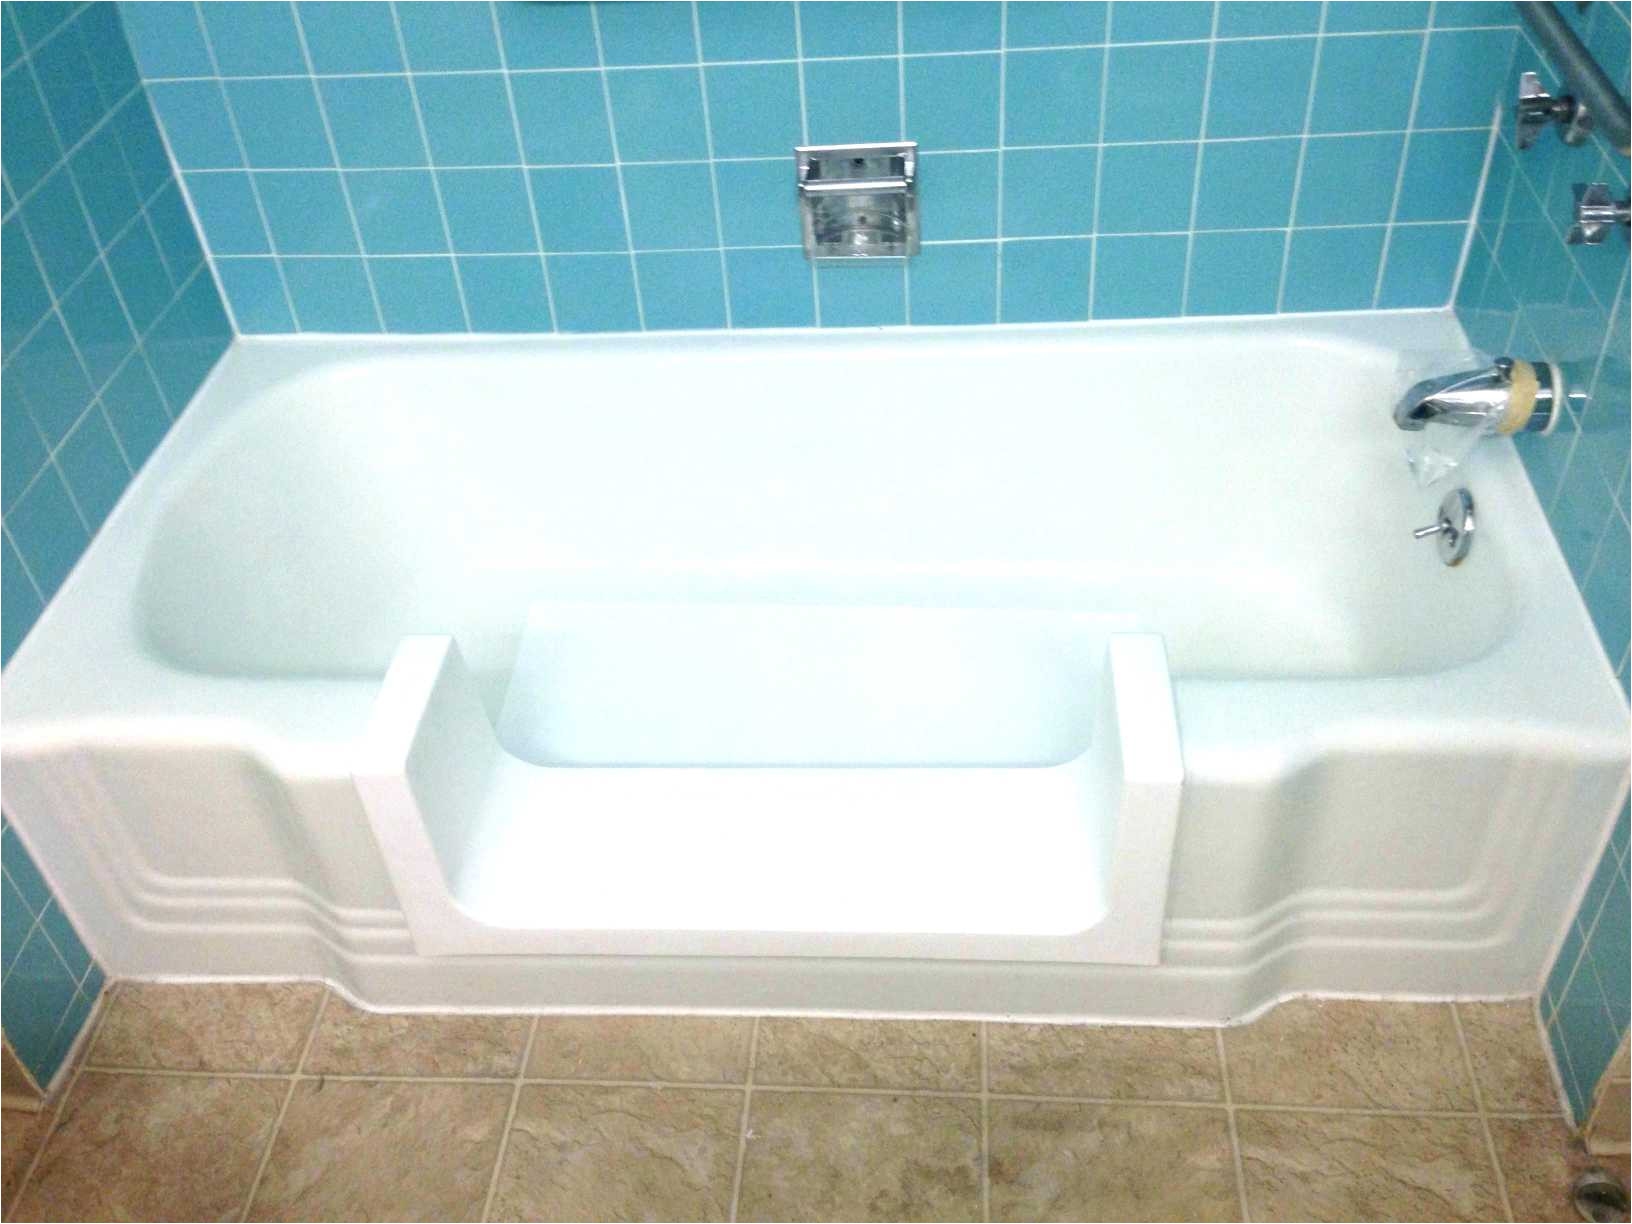 How Much Does It Cost to Reglaze A Bathtub Reglaze Bathtub Cost Unique How to Get Bathtub and Shower